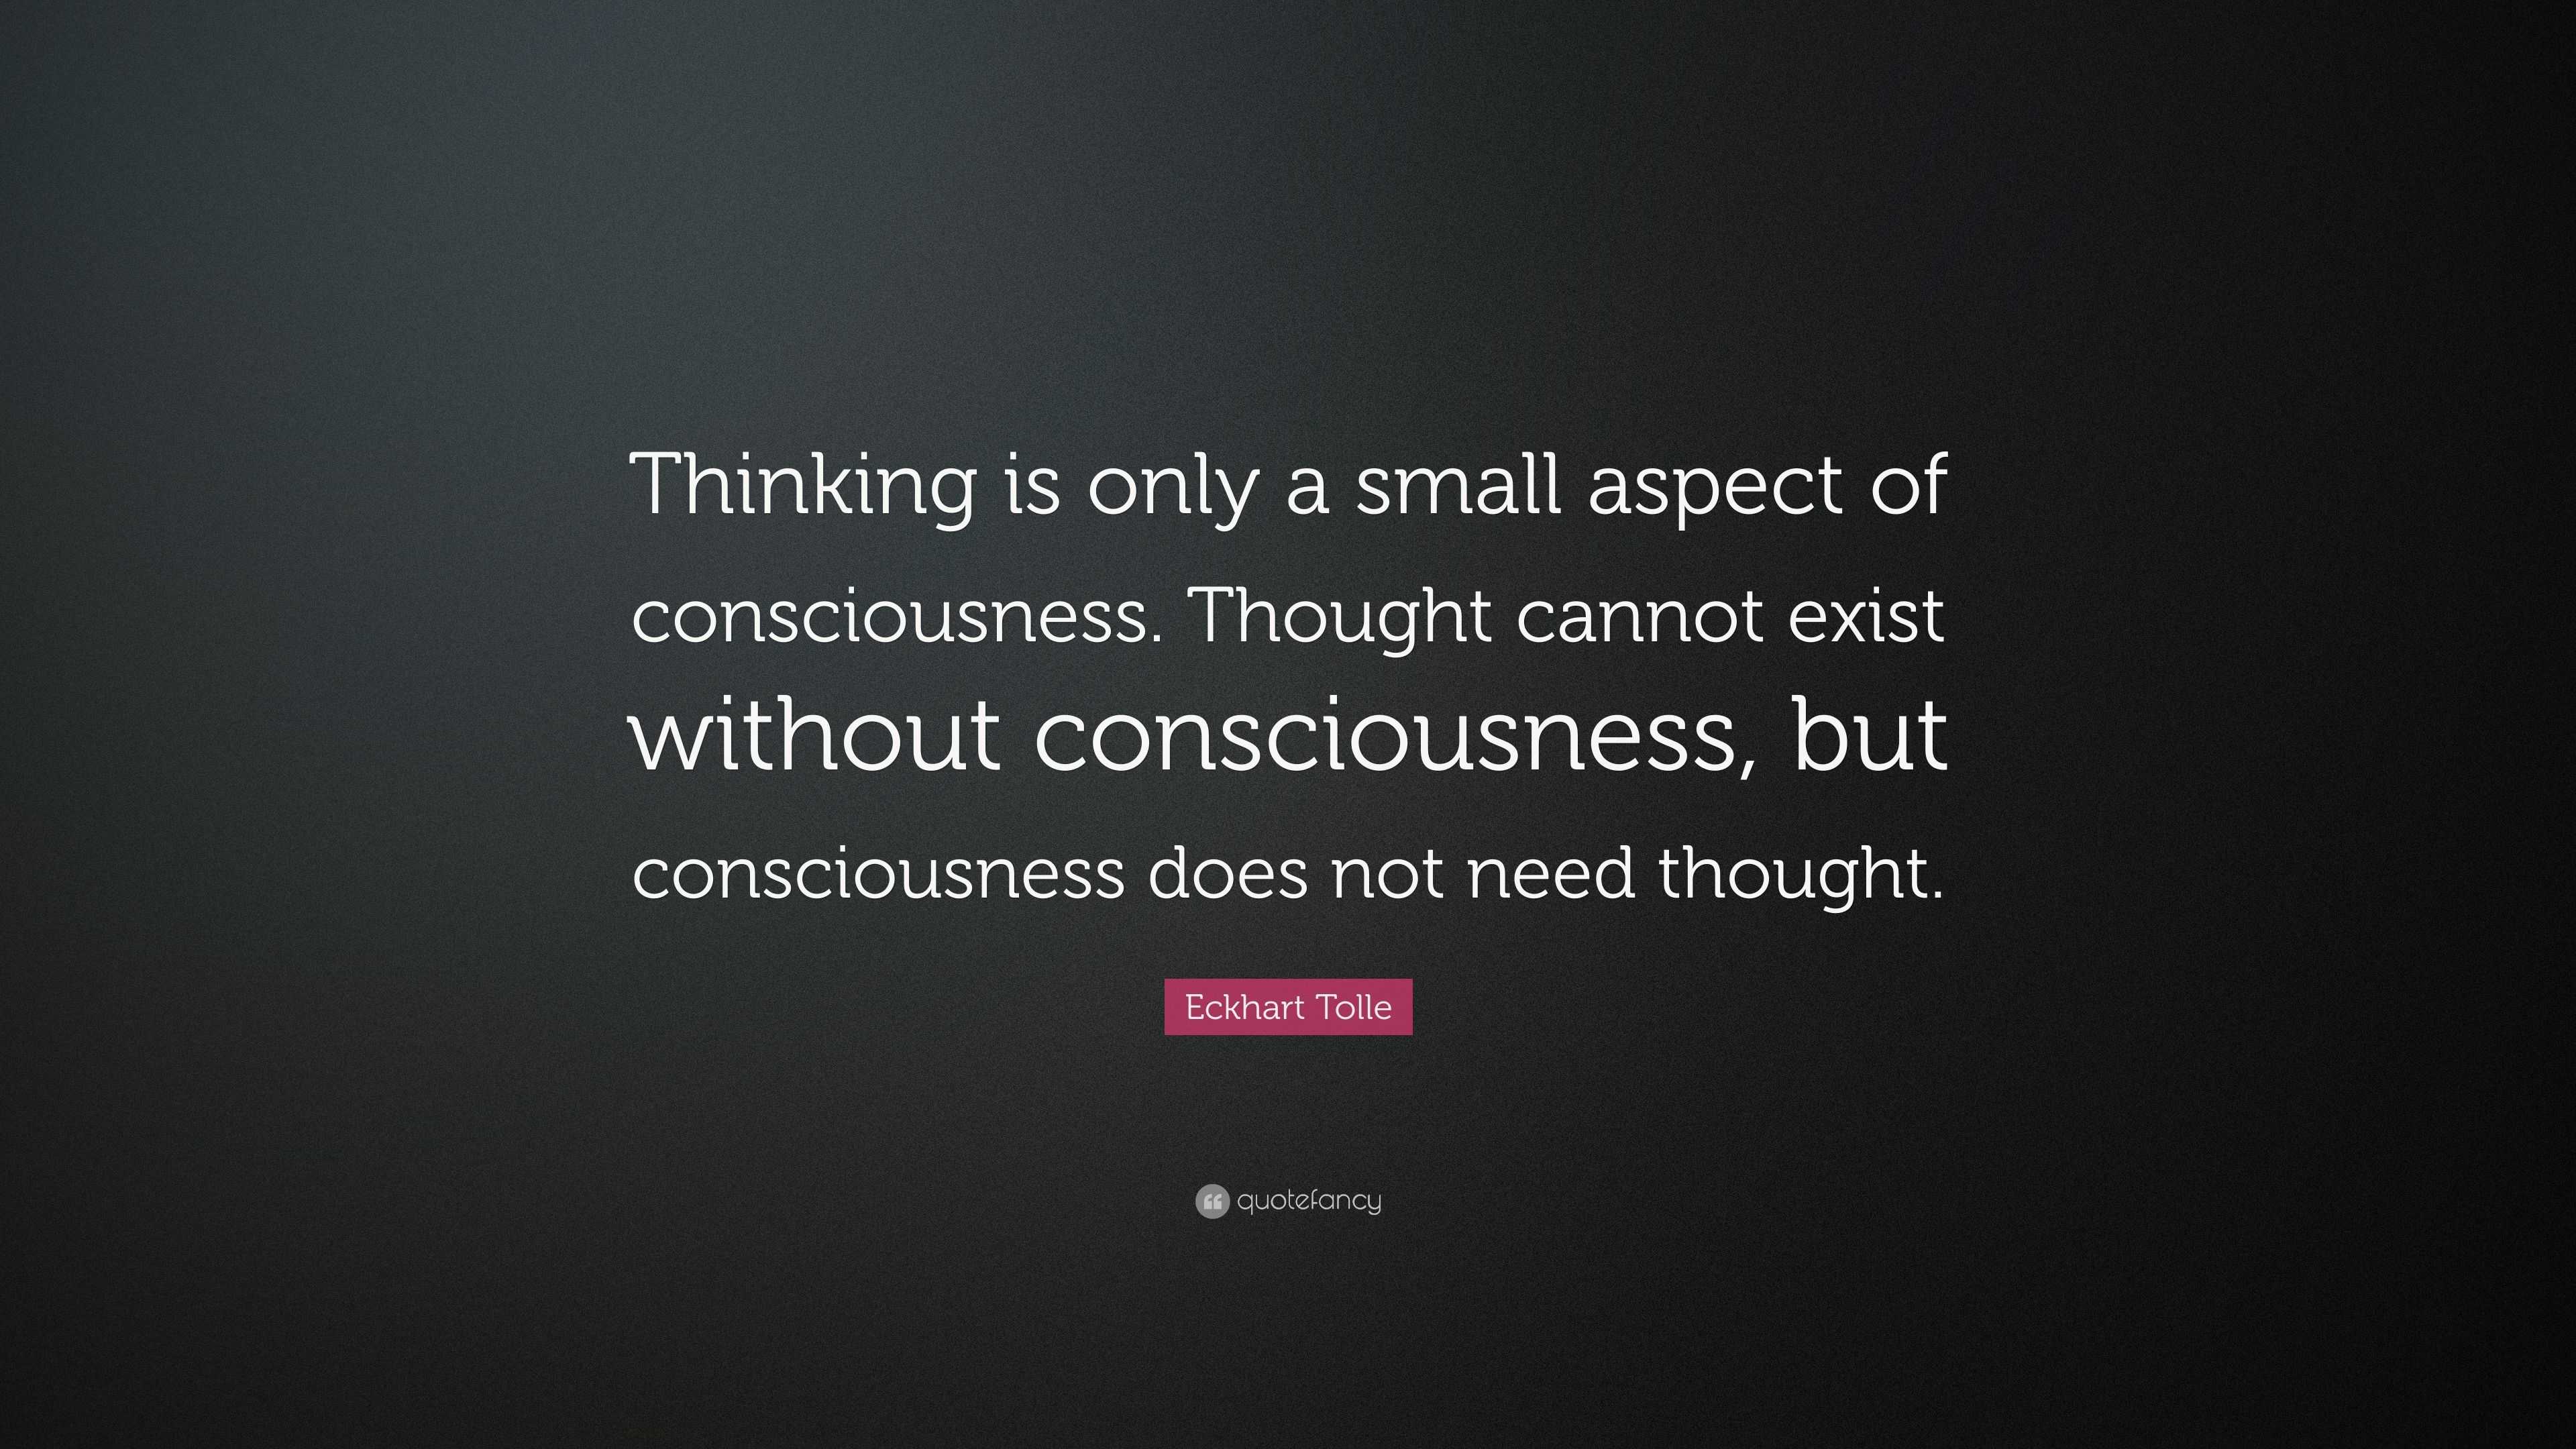 Eckhart Tolle Quote: “Thinking is only a small aspect of consciousness ...